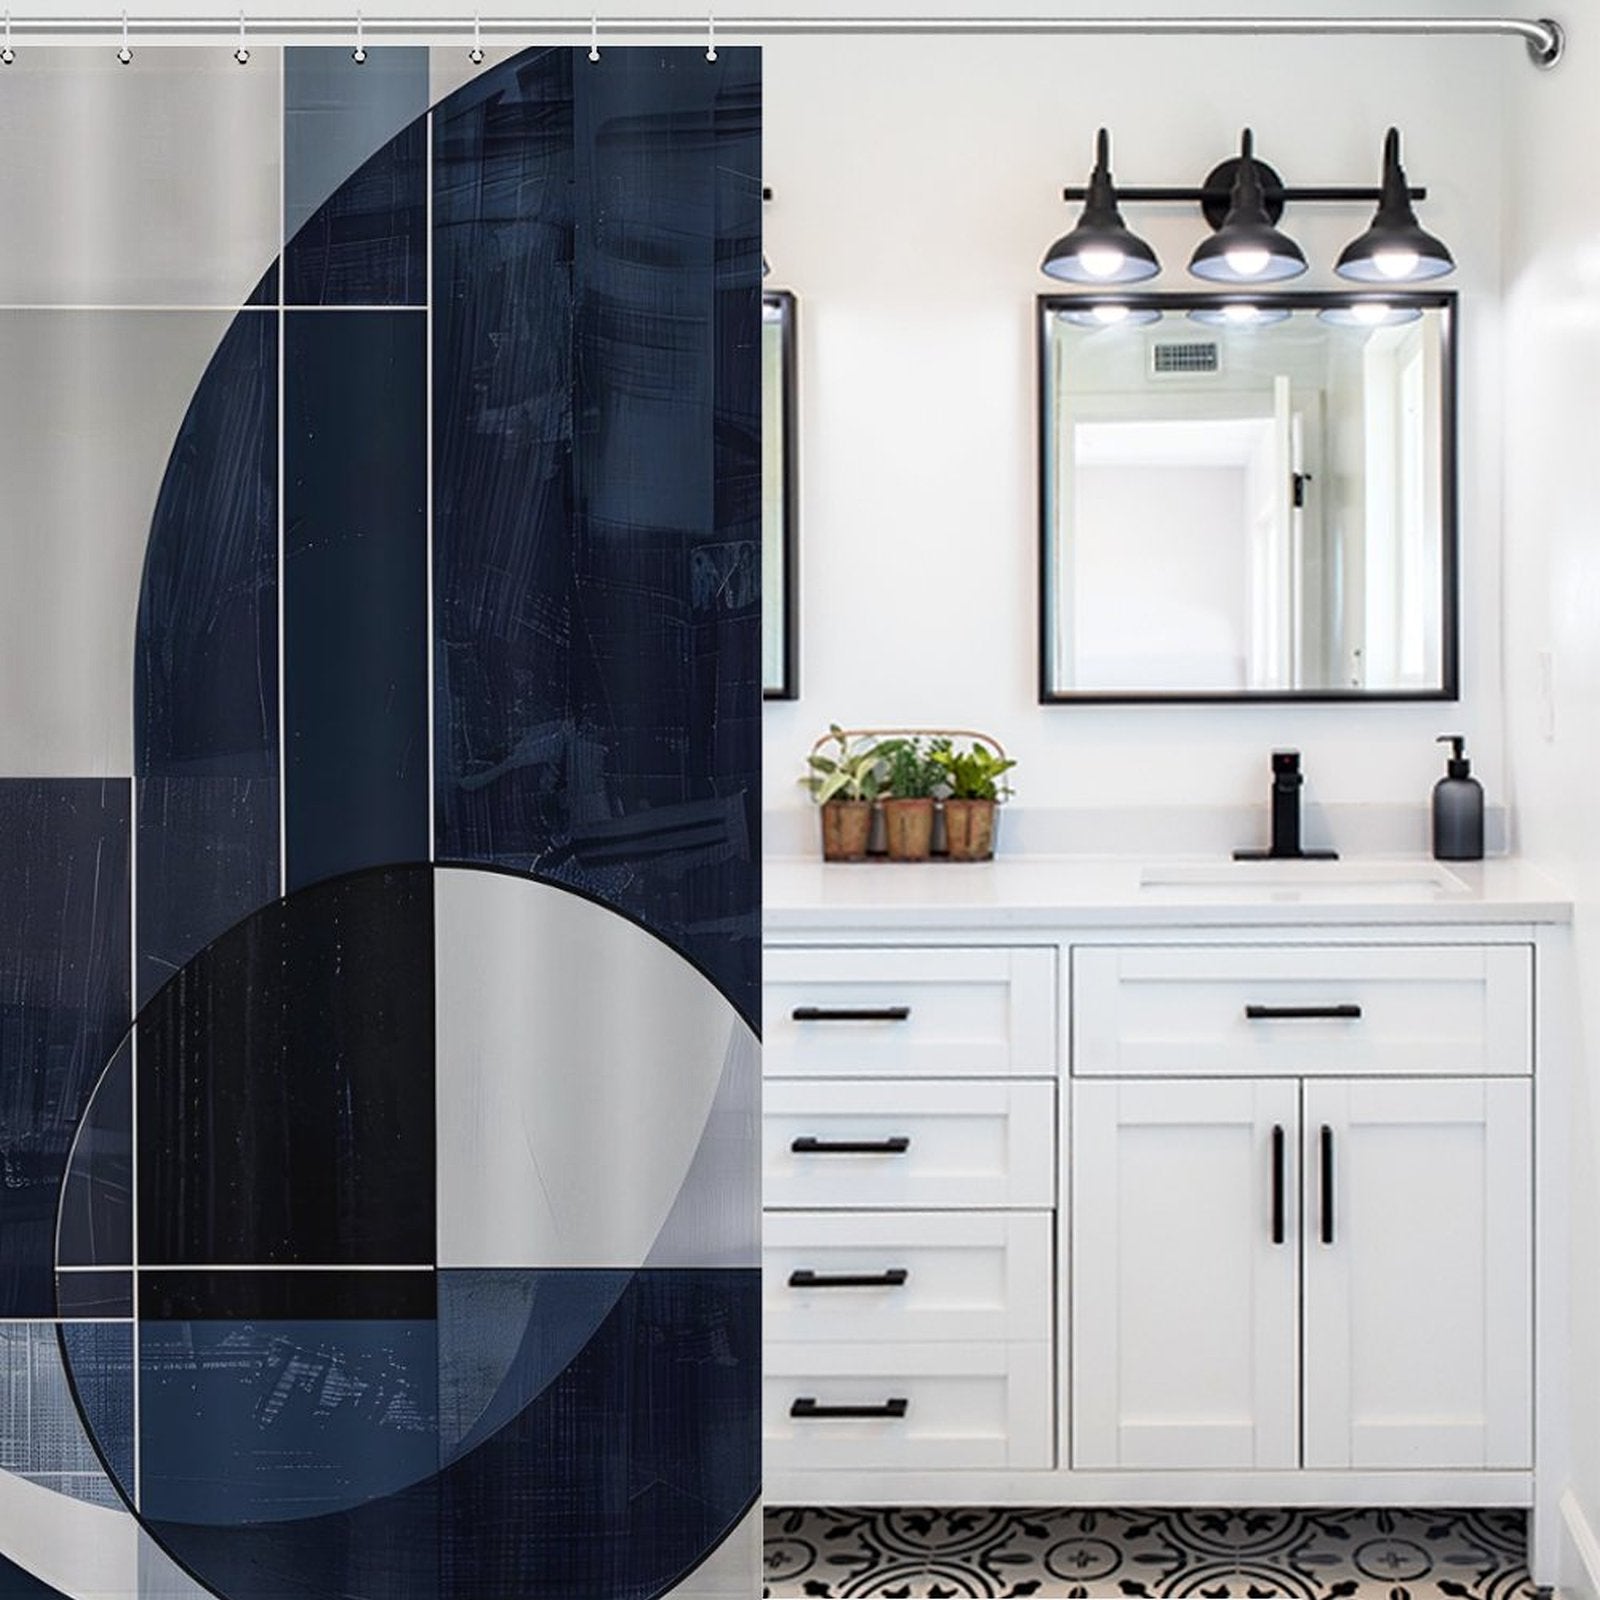 A modern bathroom with a white vanity, black handles, three mirror-mounted lights, a **Geometric Deep Blue Abstract Art Mid-Century Modern Style Shower Curtain-Cottoncat** by **Cotton Cat**, and a patterned floor.